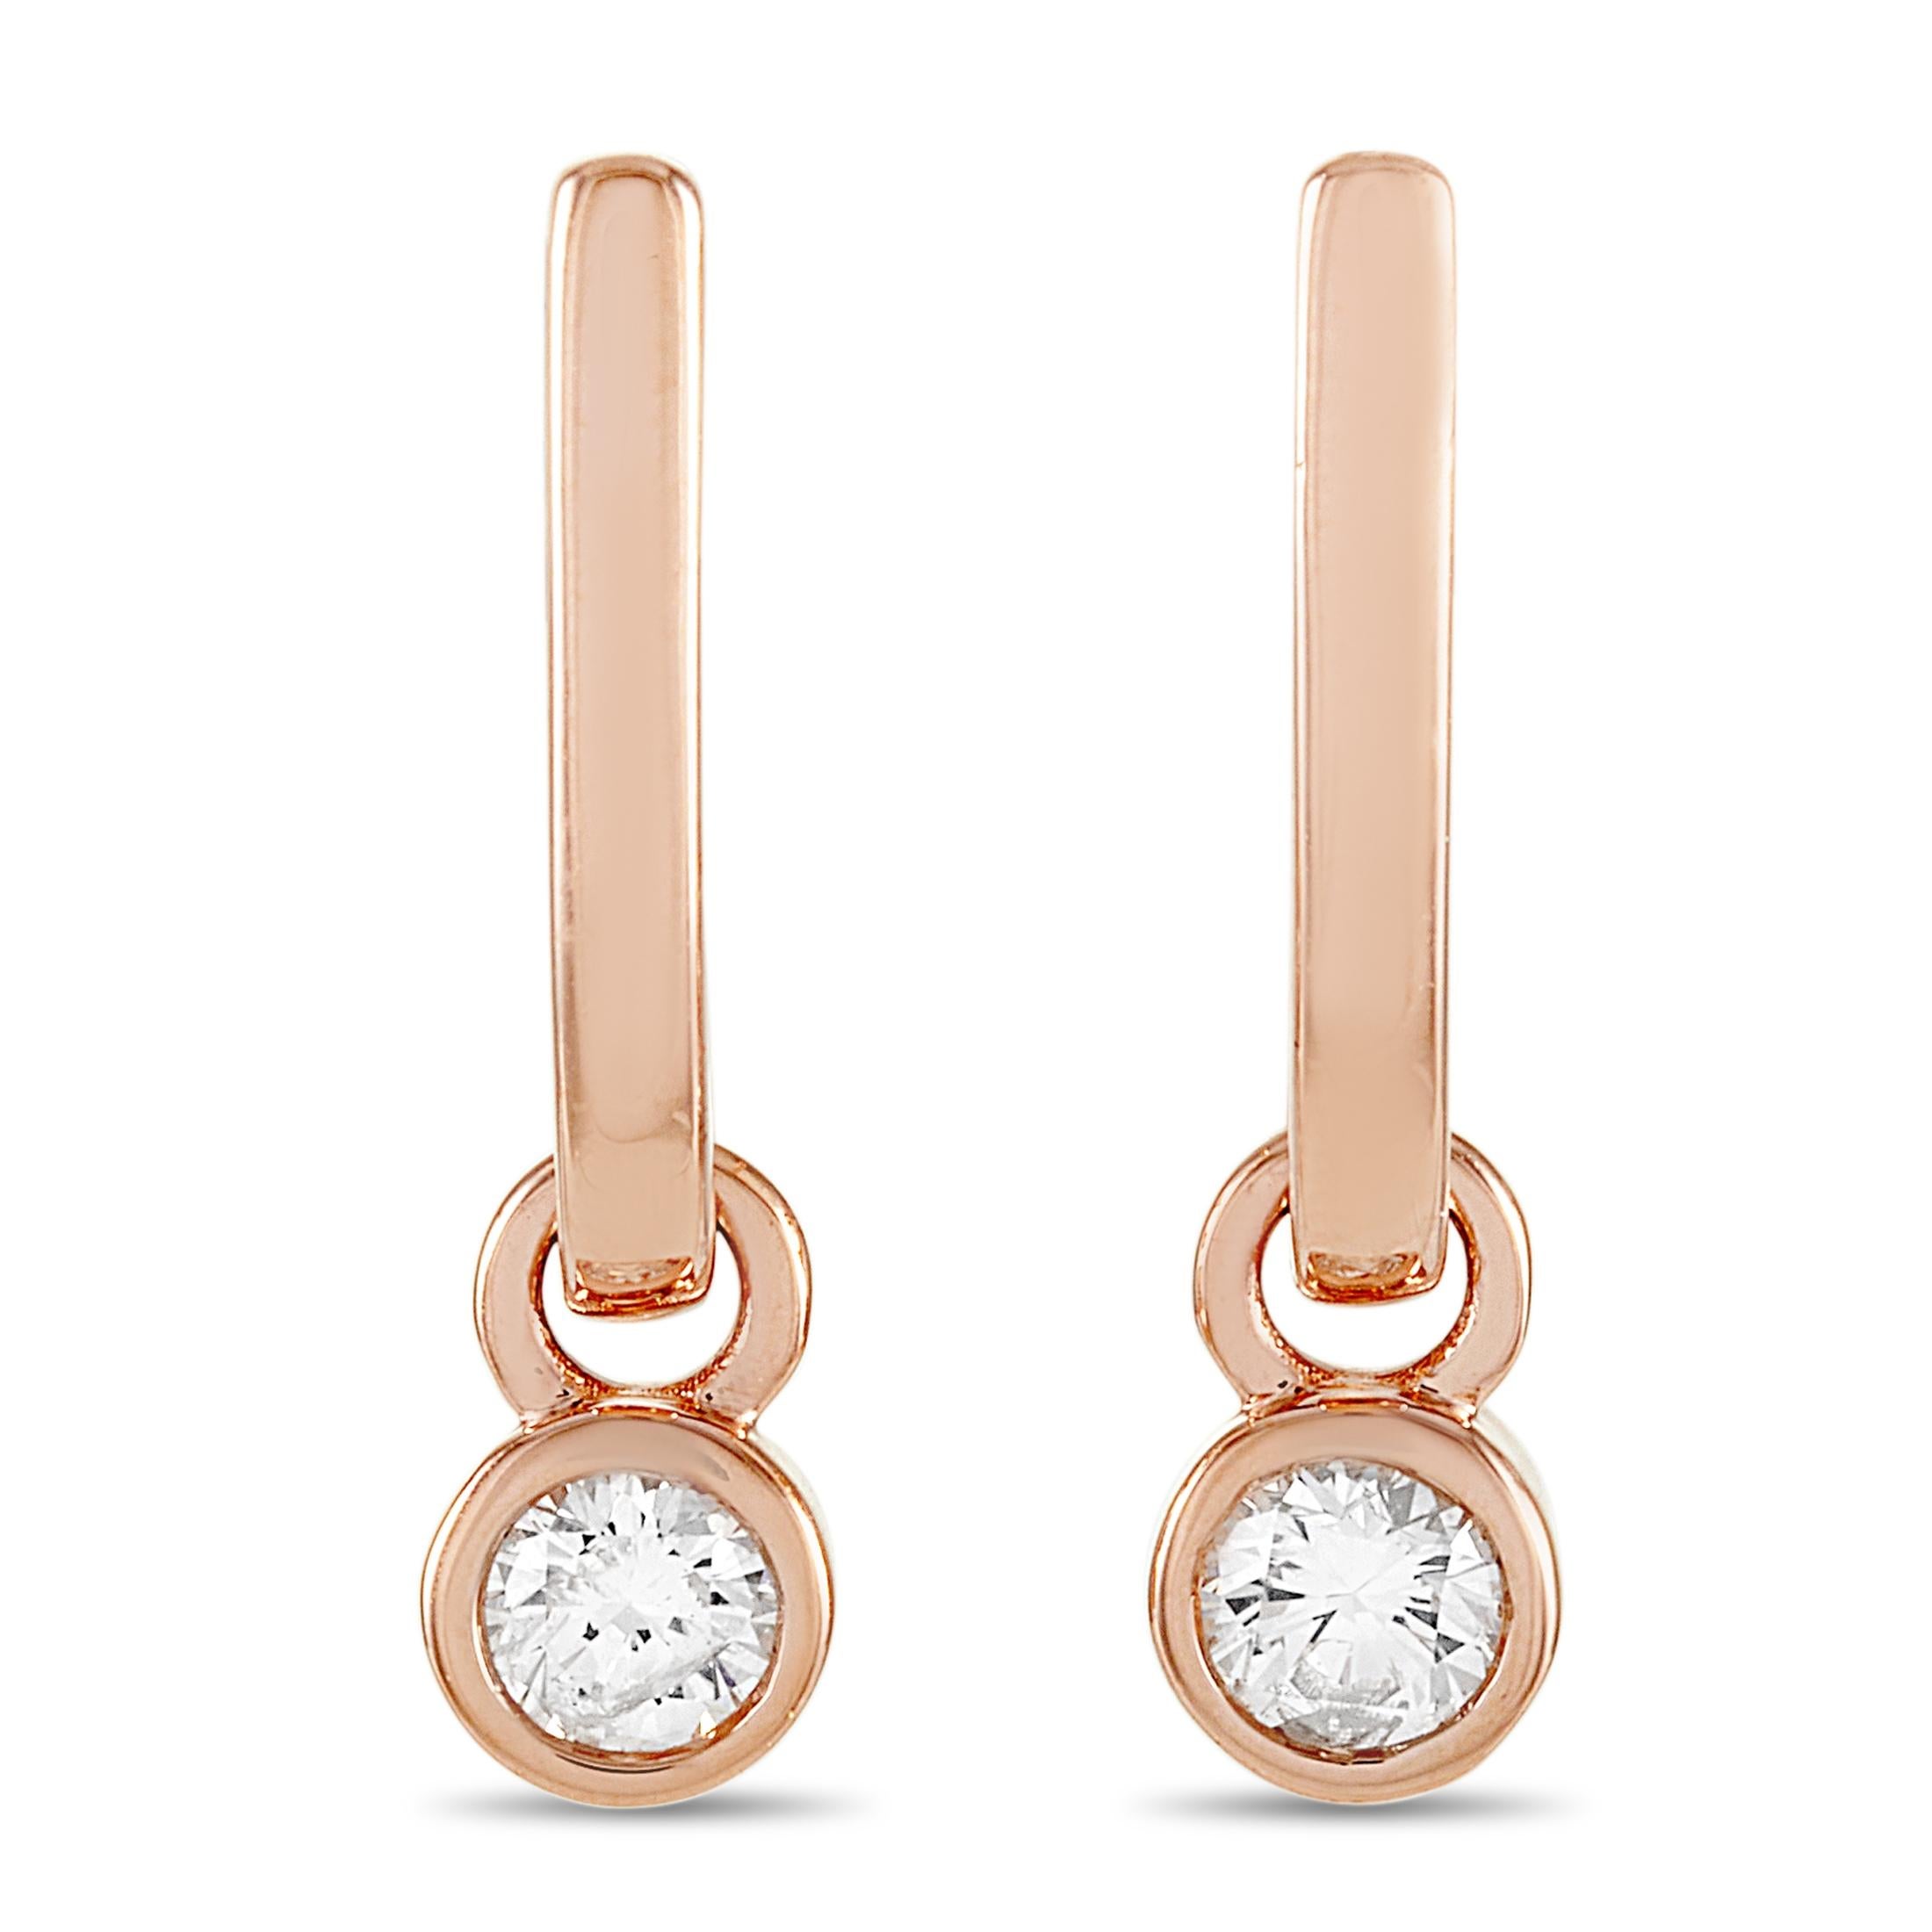 These LB Exclusive earrings are made of 14K rose gold and embellished with diamonds that total 0.40 carats. The earrings measure 0.75” in length and 0.19” in width and each of the two weighs 1.65 grams.

The pair is offered in brand new condition